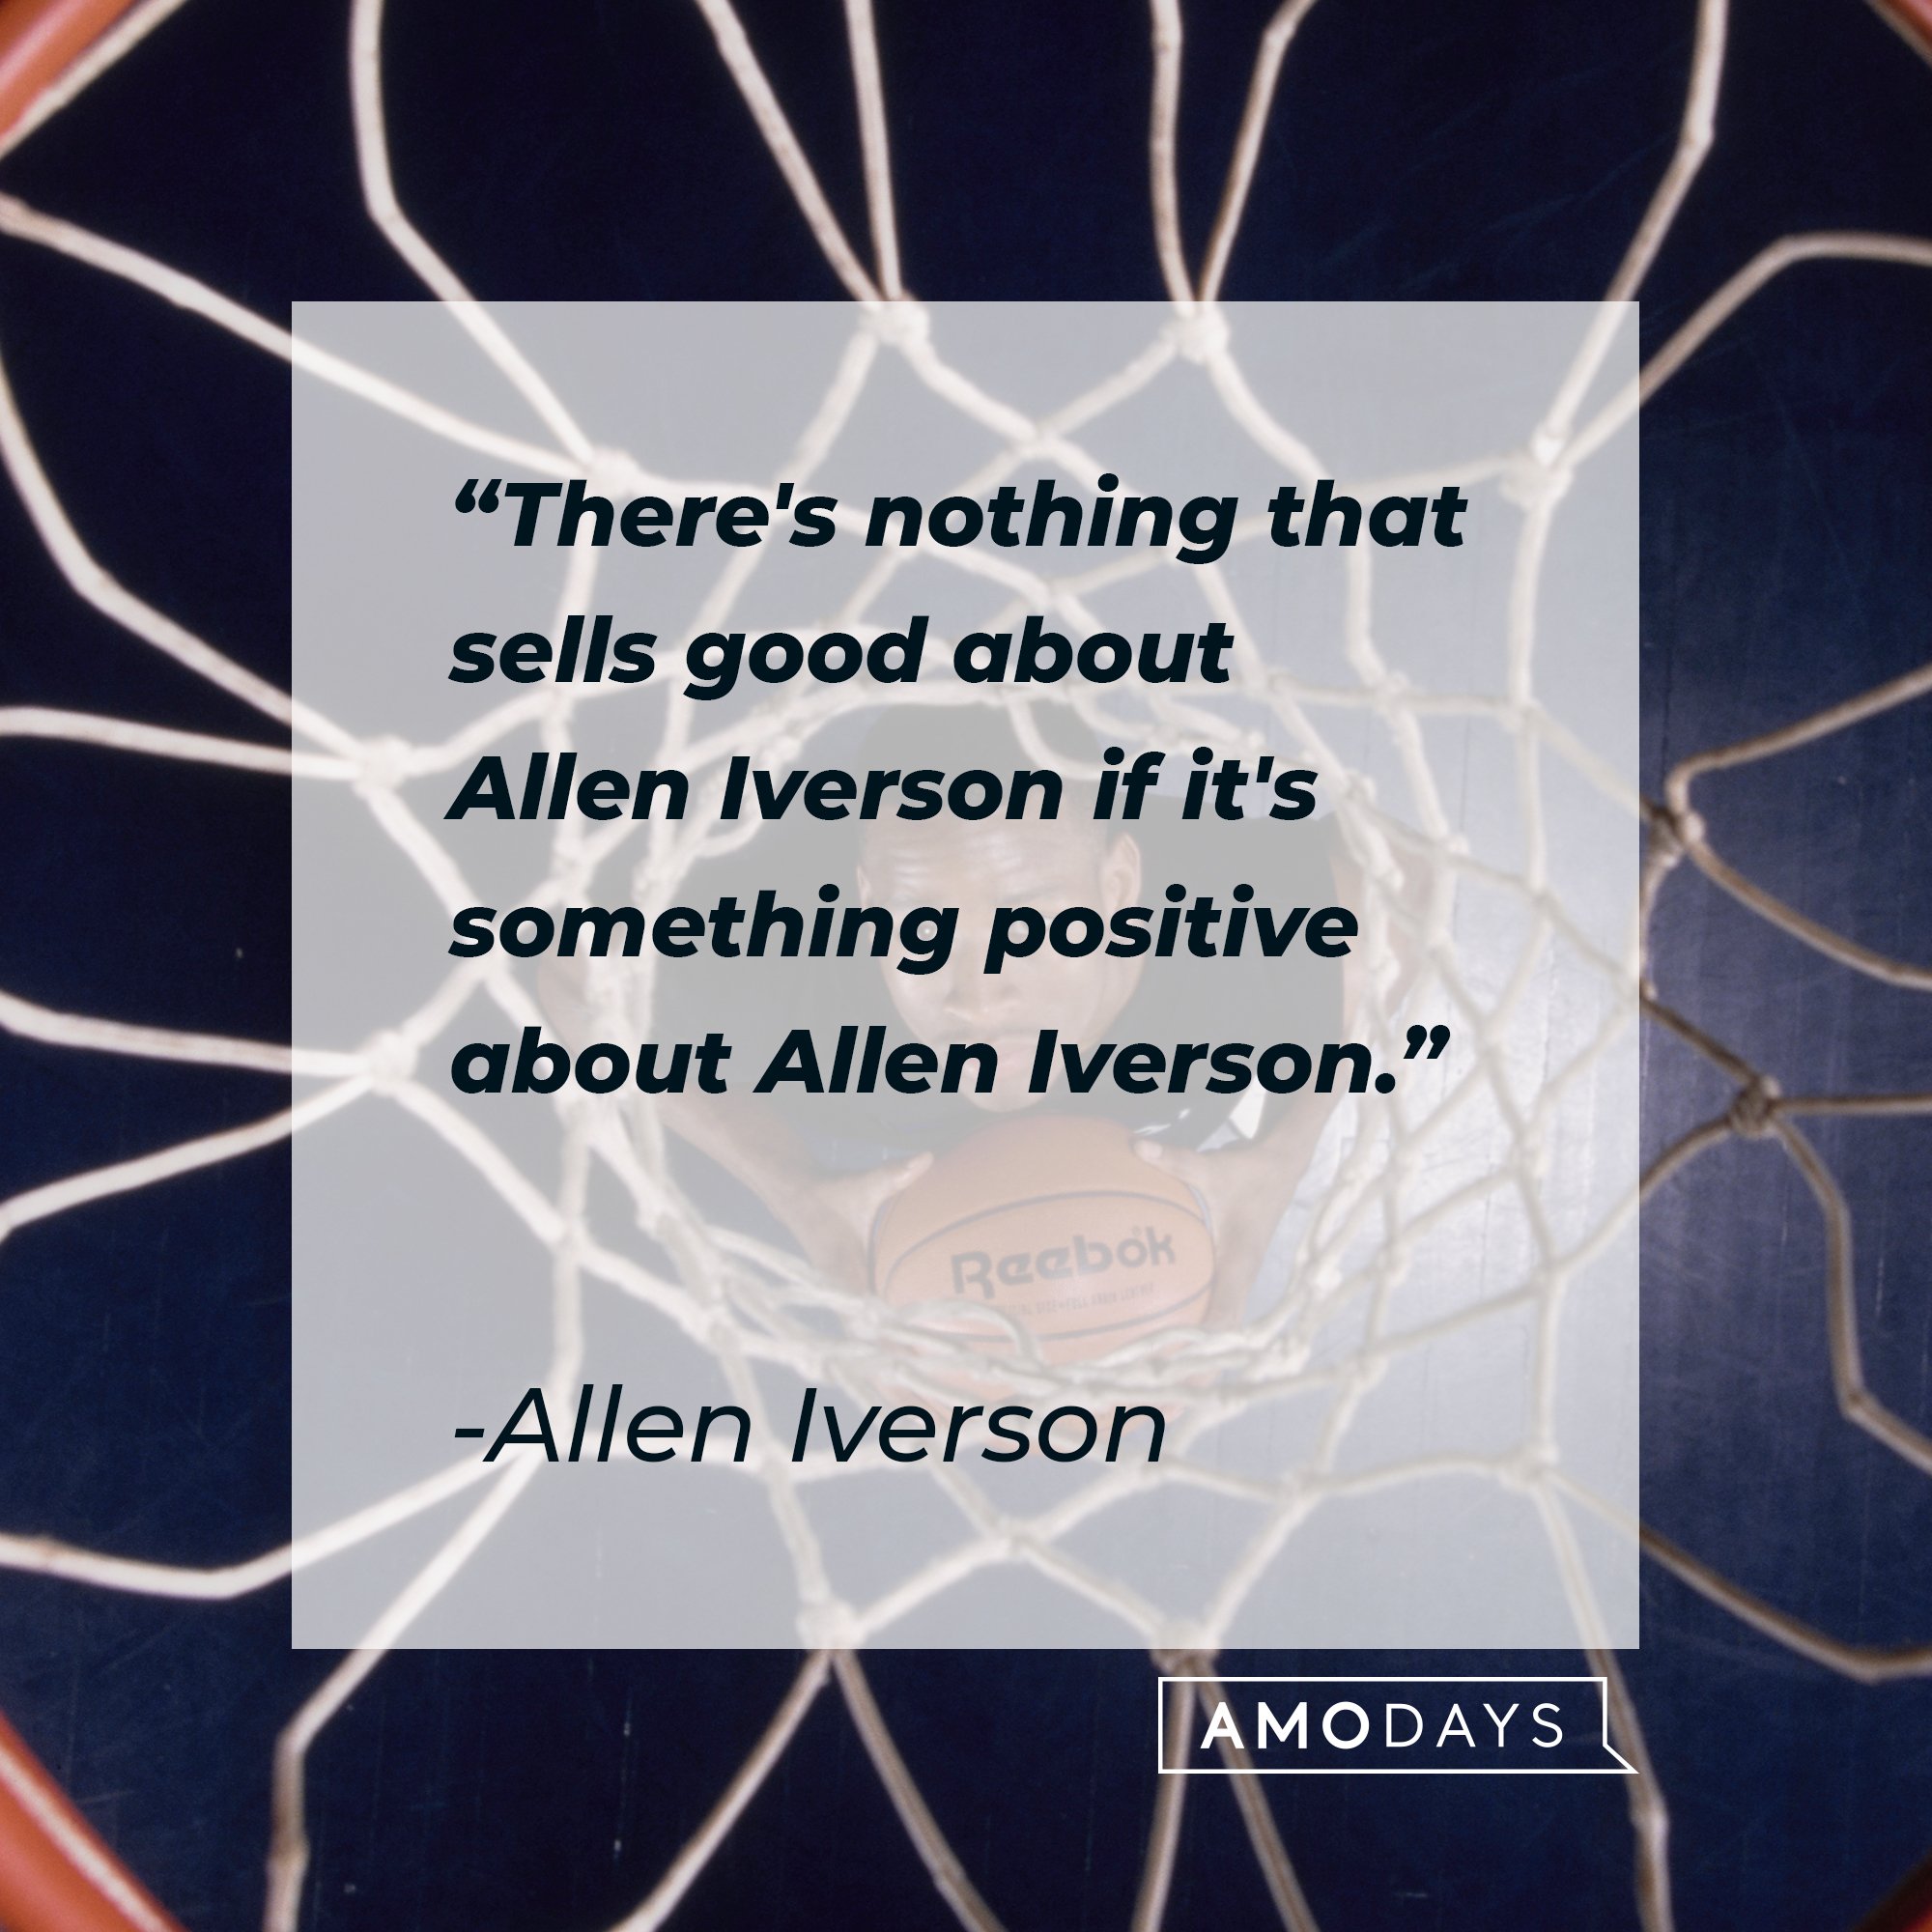 Allen Iverson's quote: "There's nothing that sells good about Allen Iverson if it's something positive about Allen Iverson." | Image: AmoDays